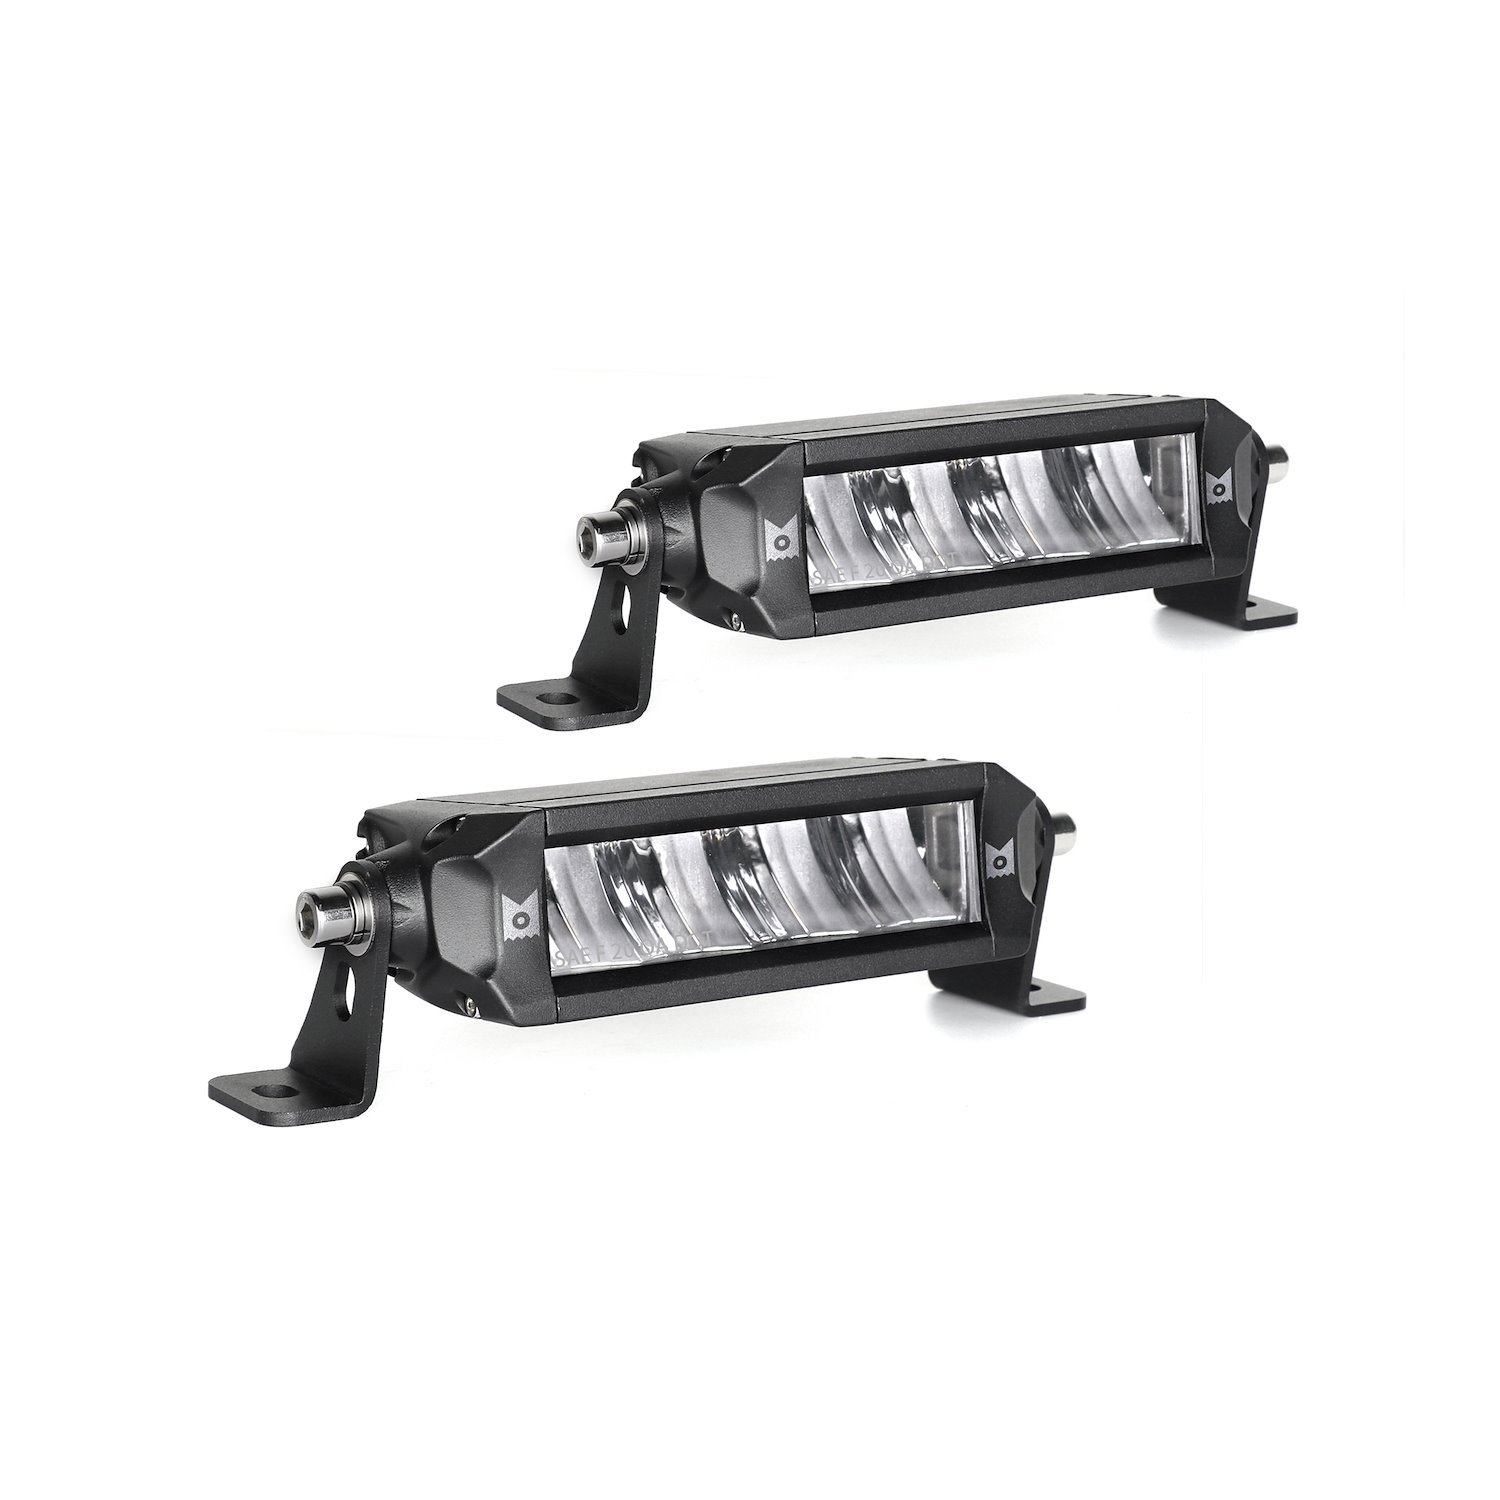 61012 Xtreme Series Bar, 6 in. Street Legal LED Fog Light with Amber Strobe, Pair